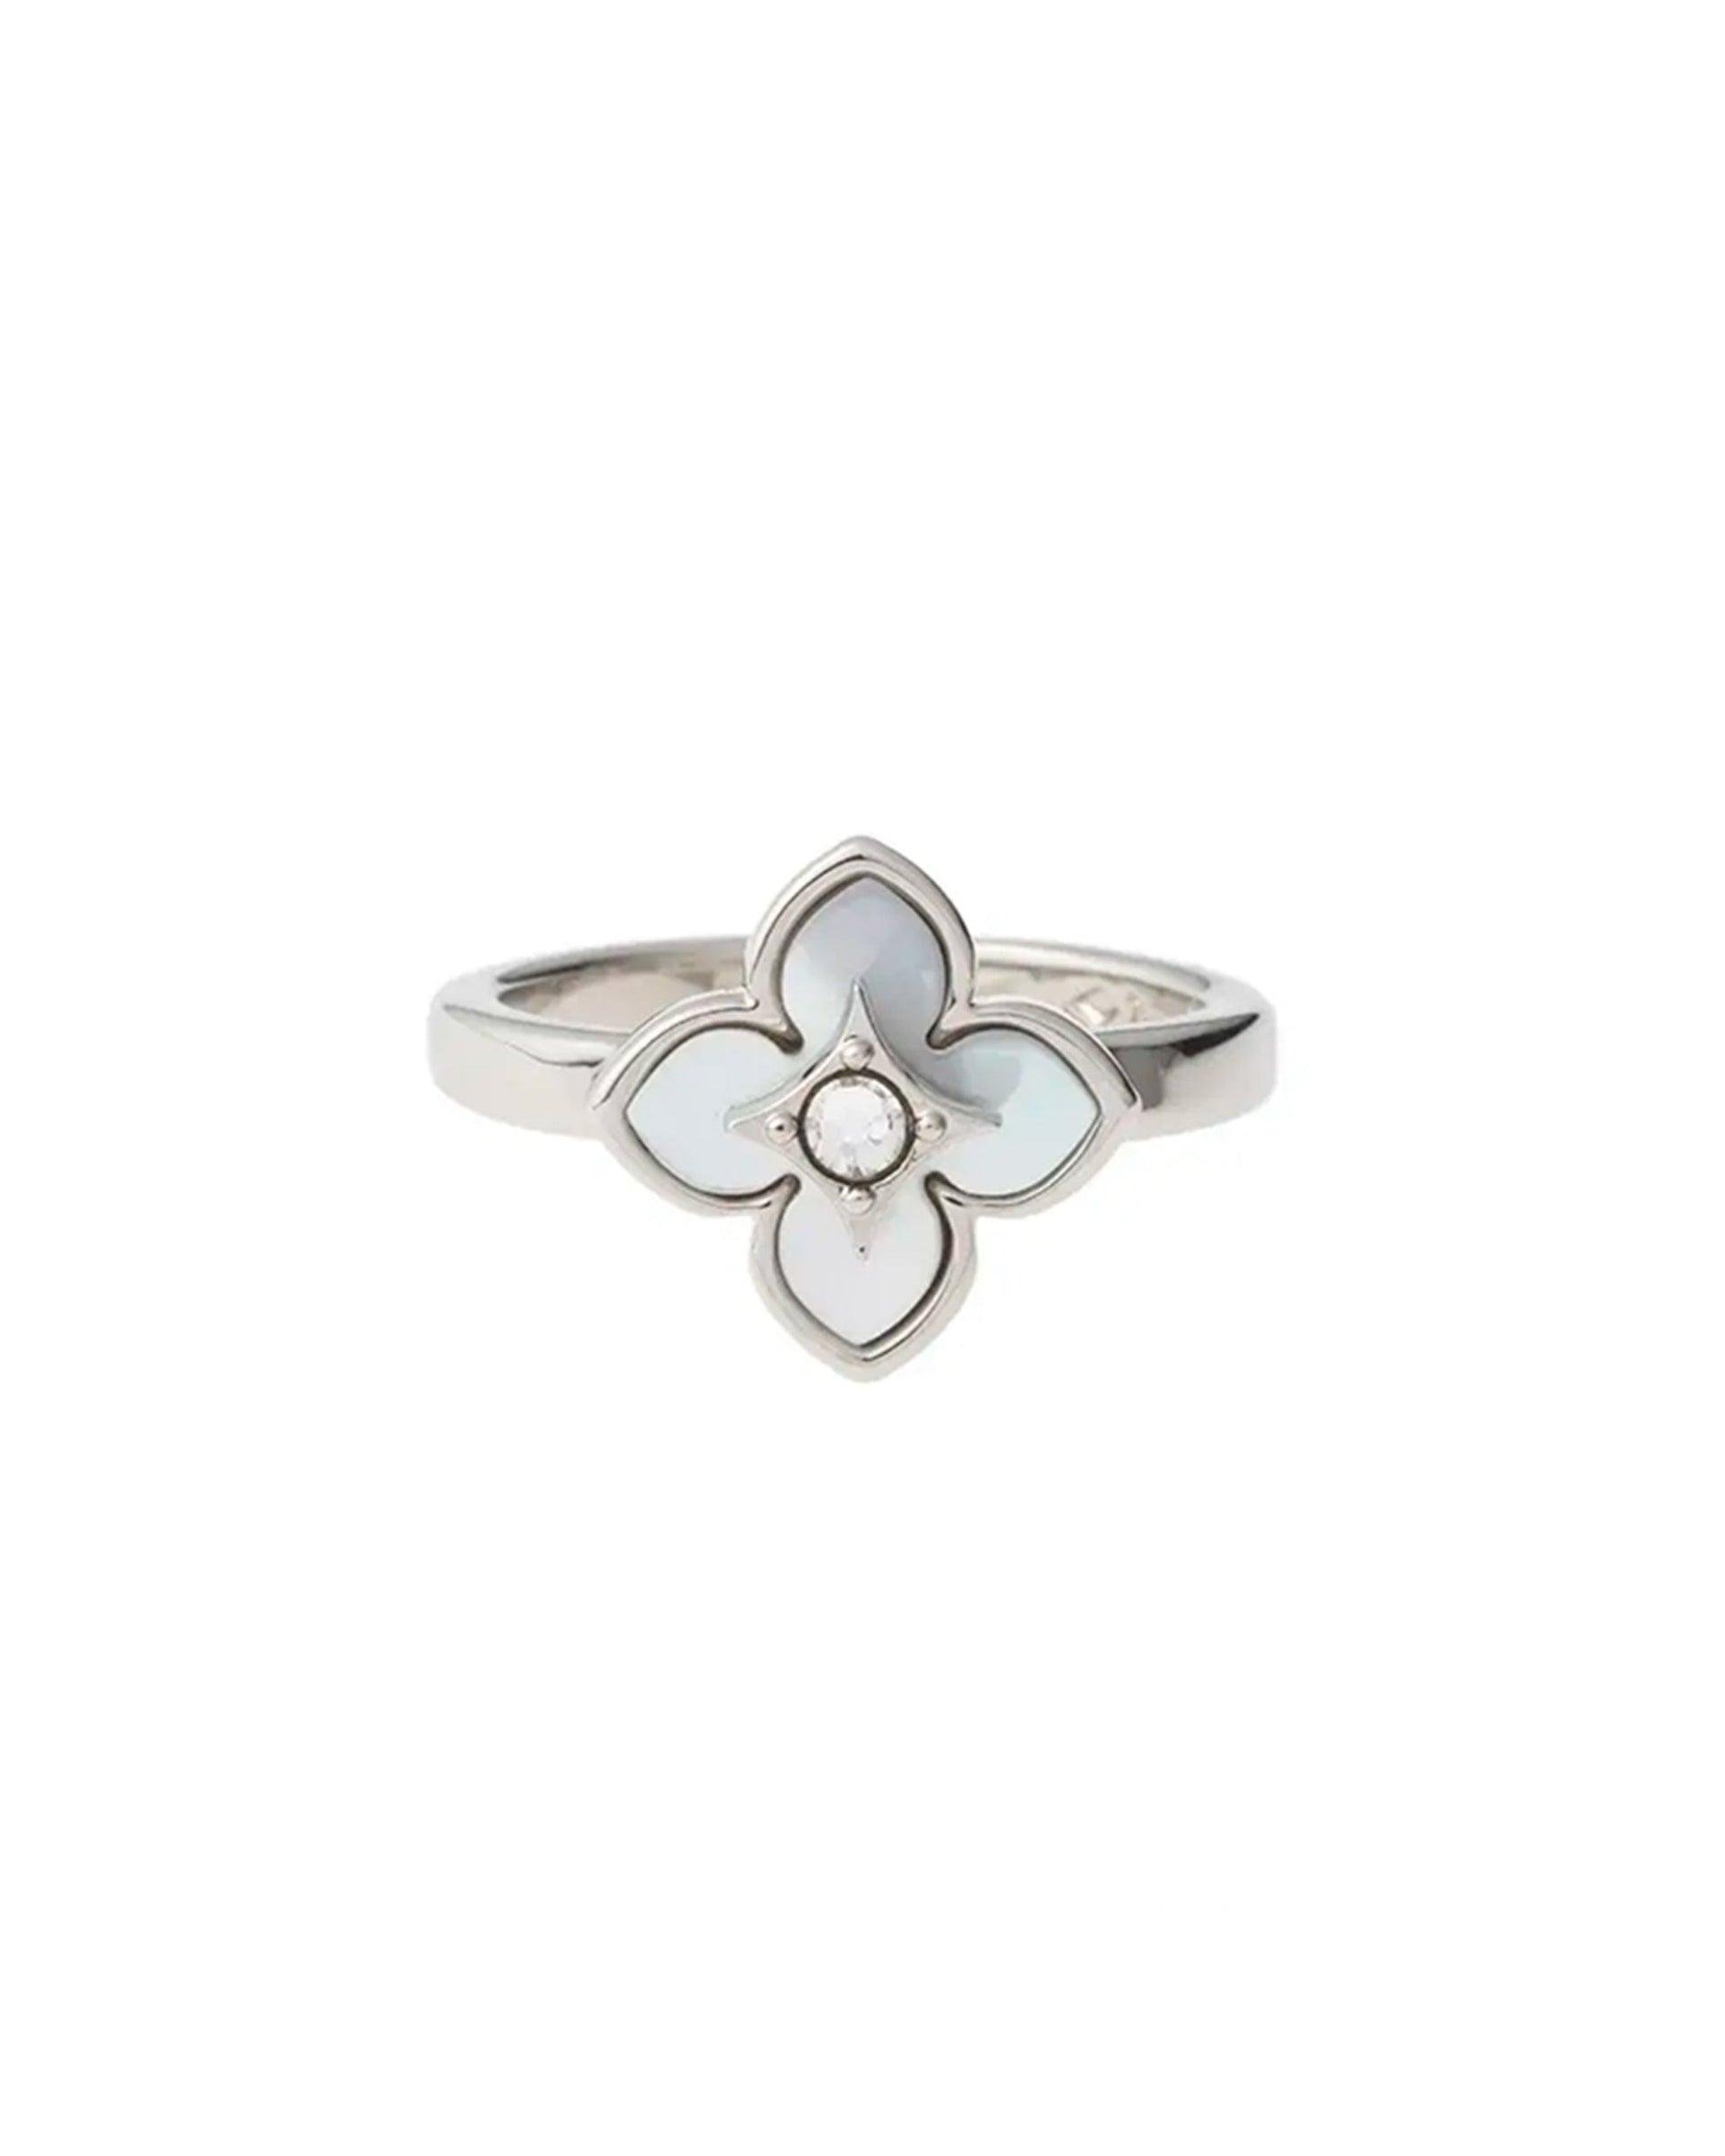 Vendome Flower Motif Ring by ANTEPRIMA